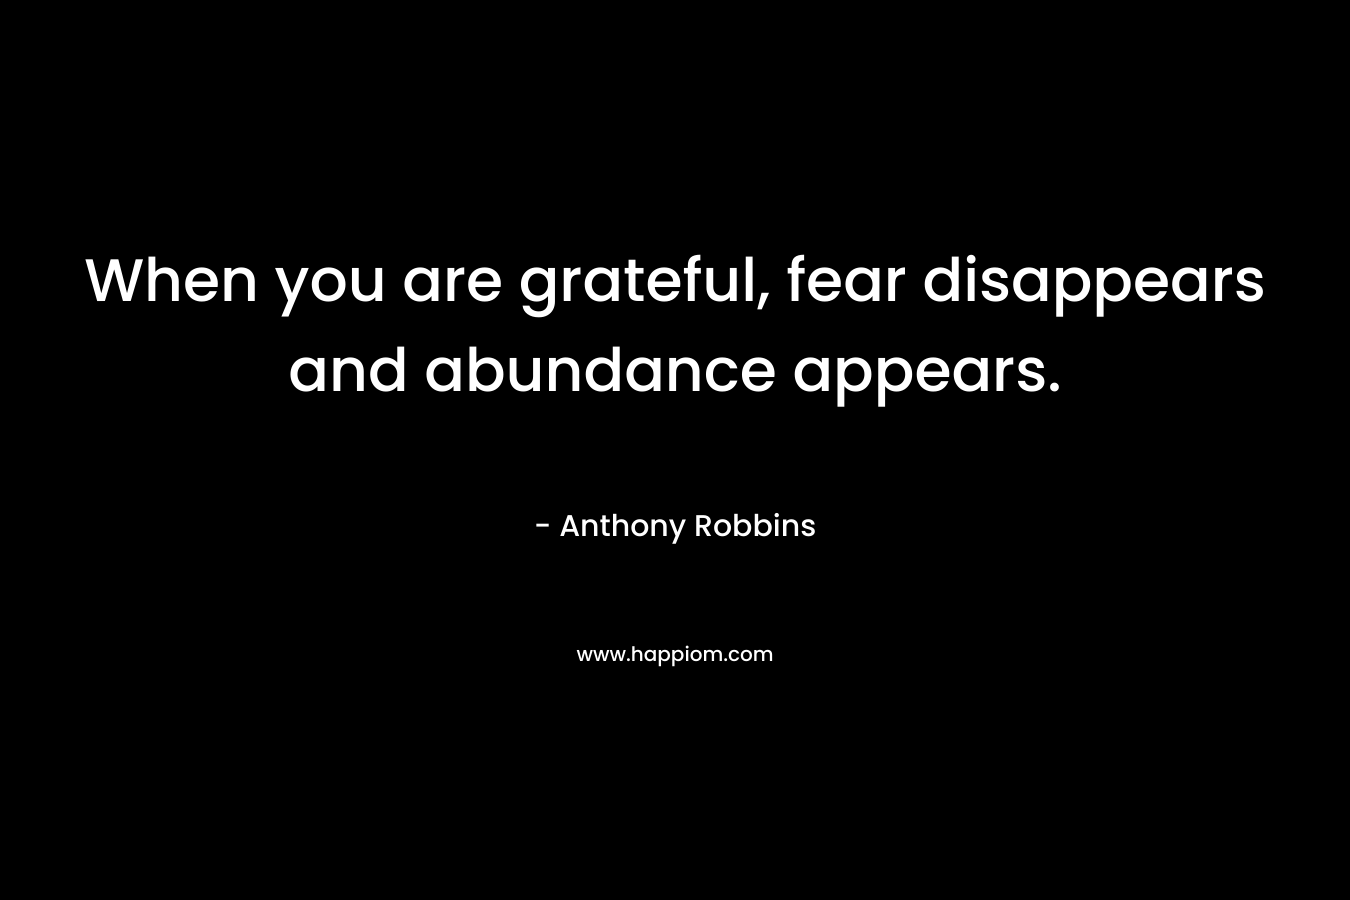 When you are grateful, fear disappears and abundance appears. – Anthony Robbins